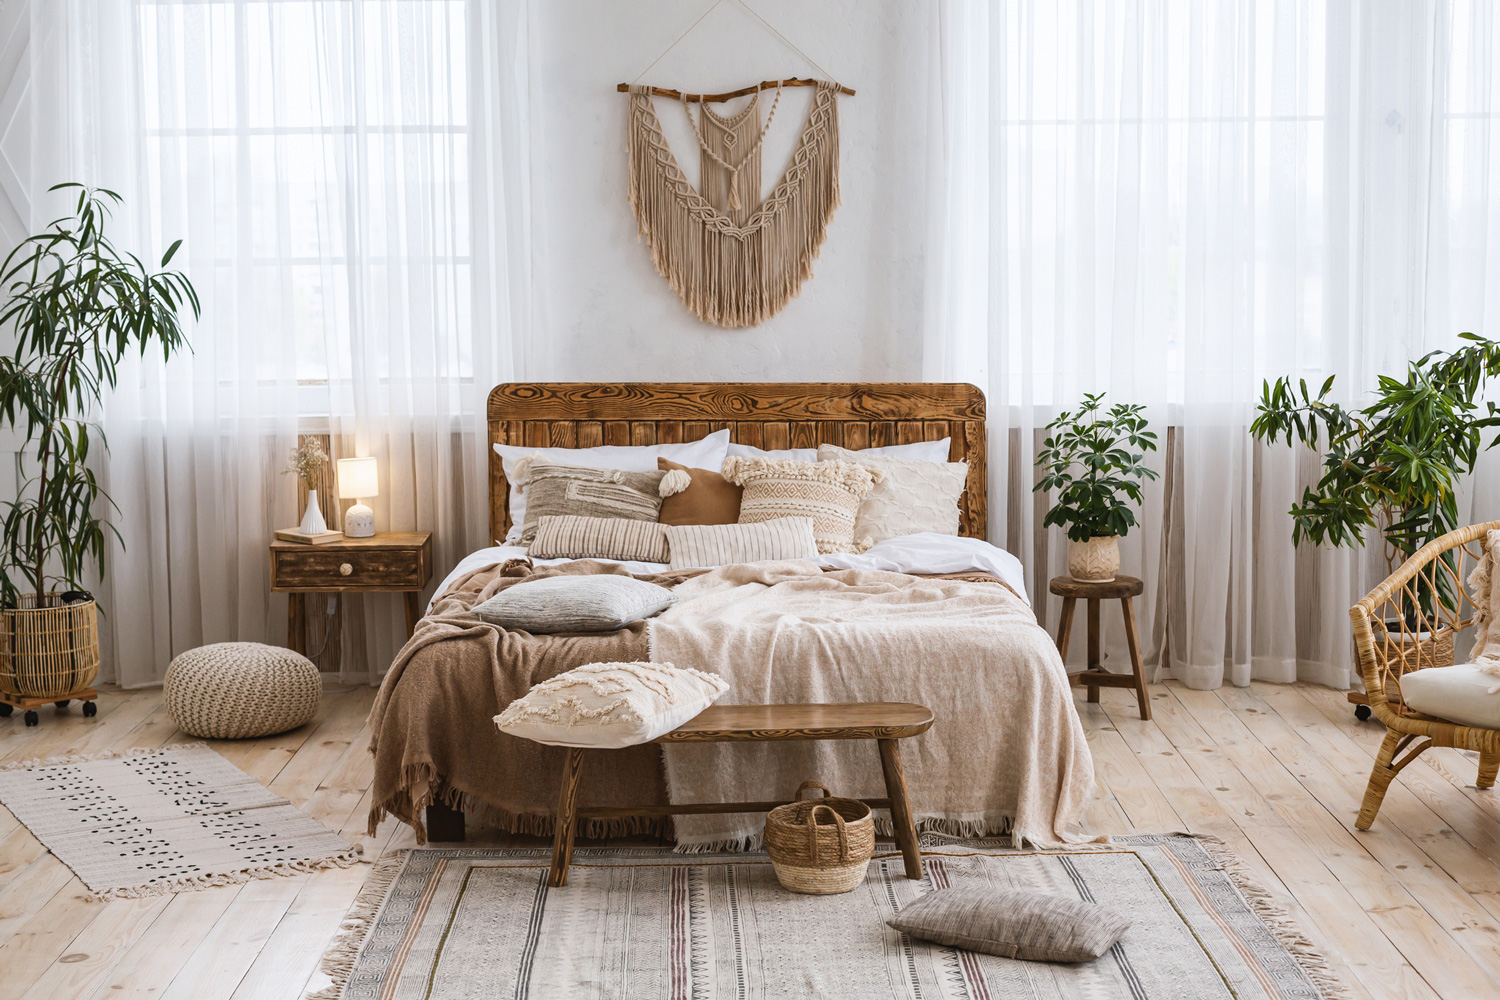 Rustic home design with ethnic decoration. Bed with pillows, wooden furniture, plants in pots, armchair and curtains on large windows in cozy bedroom interior, nobody, flat lay, panorama